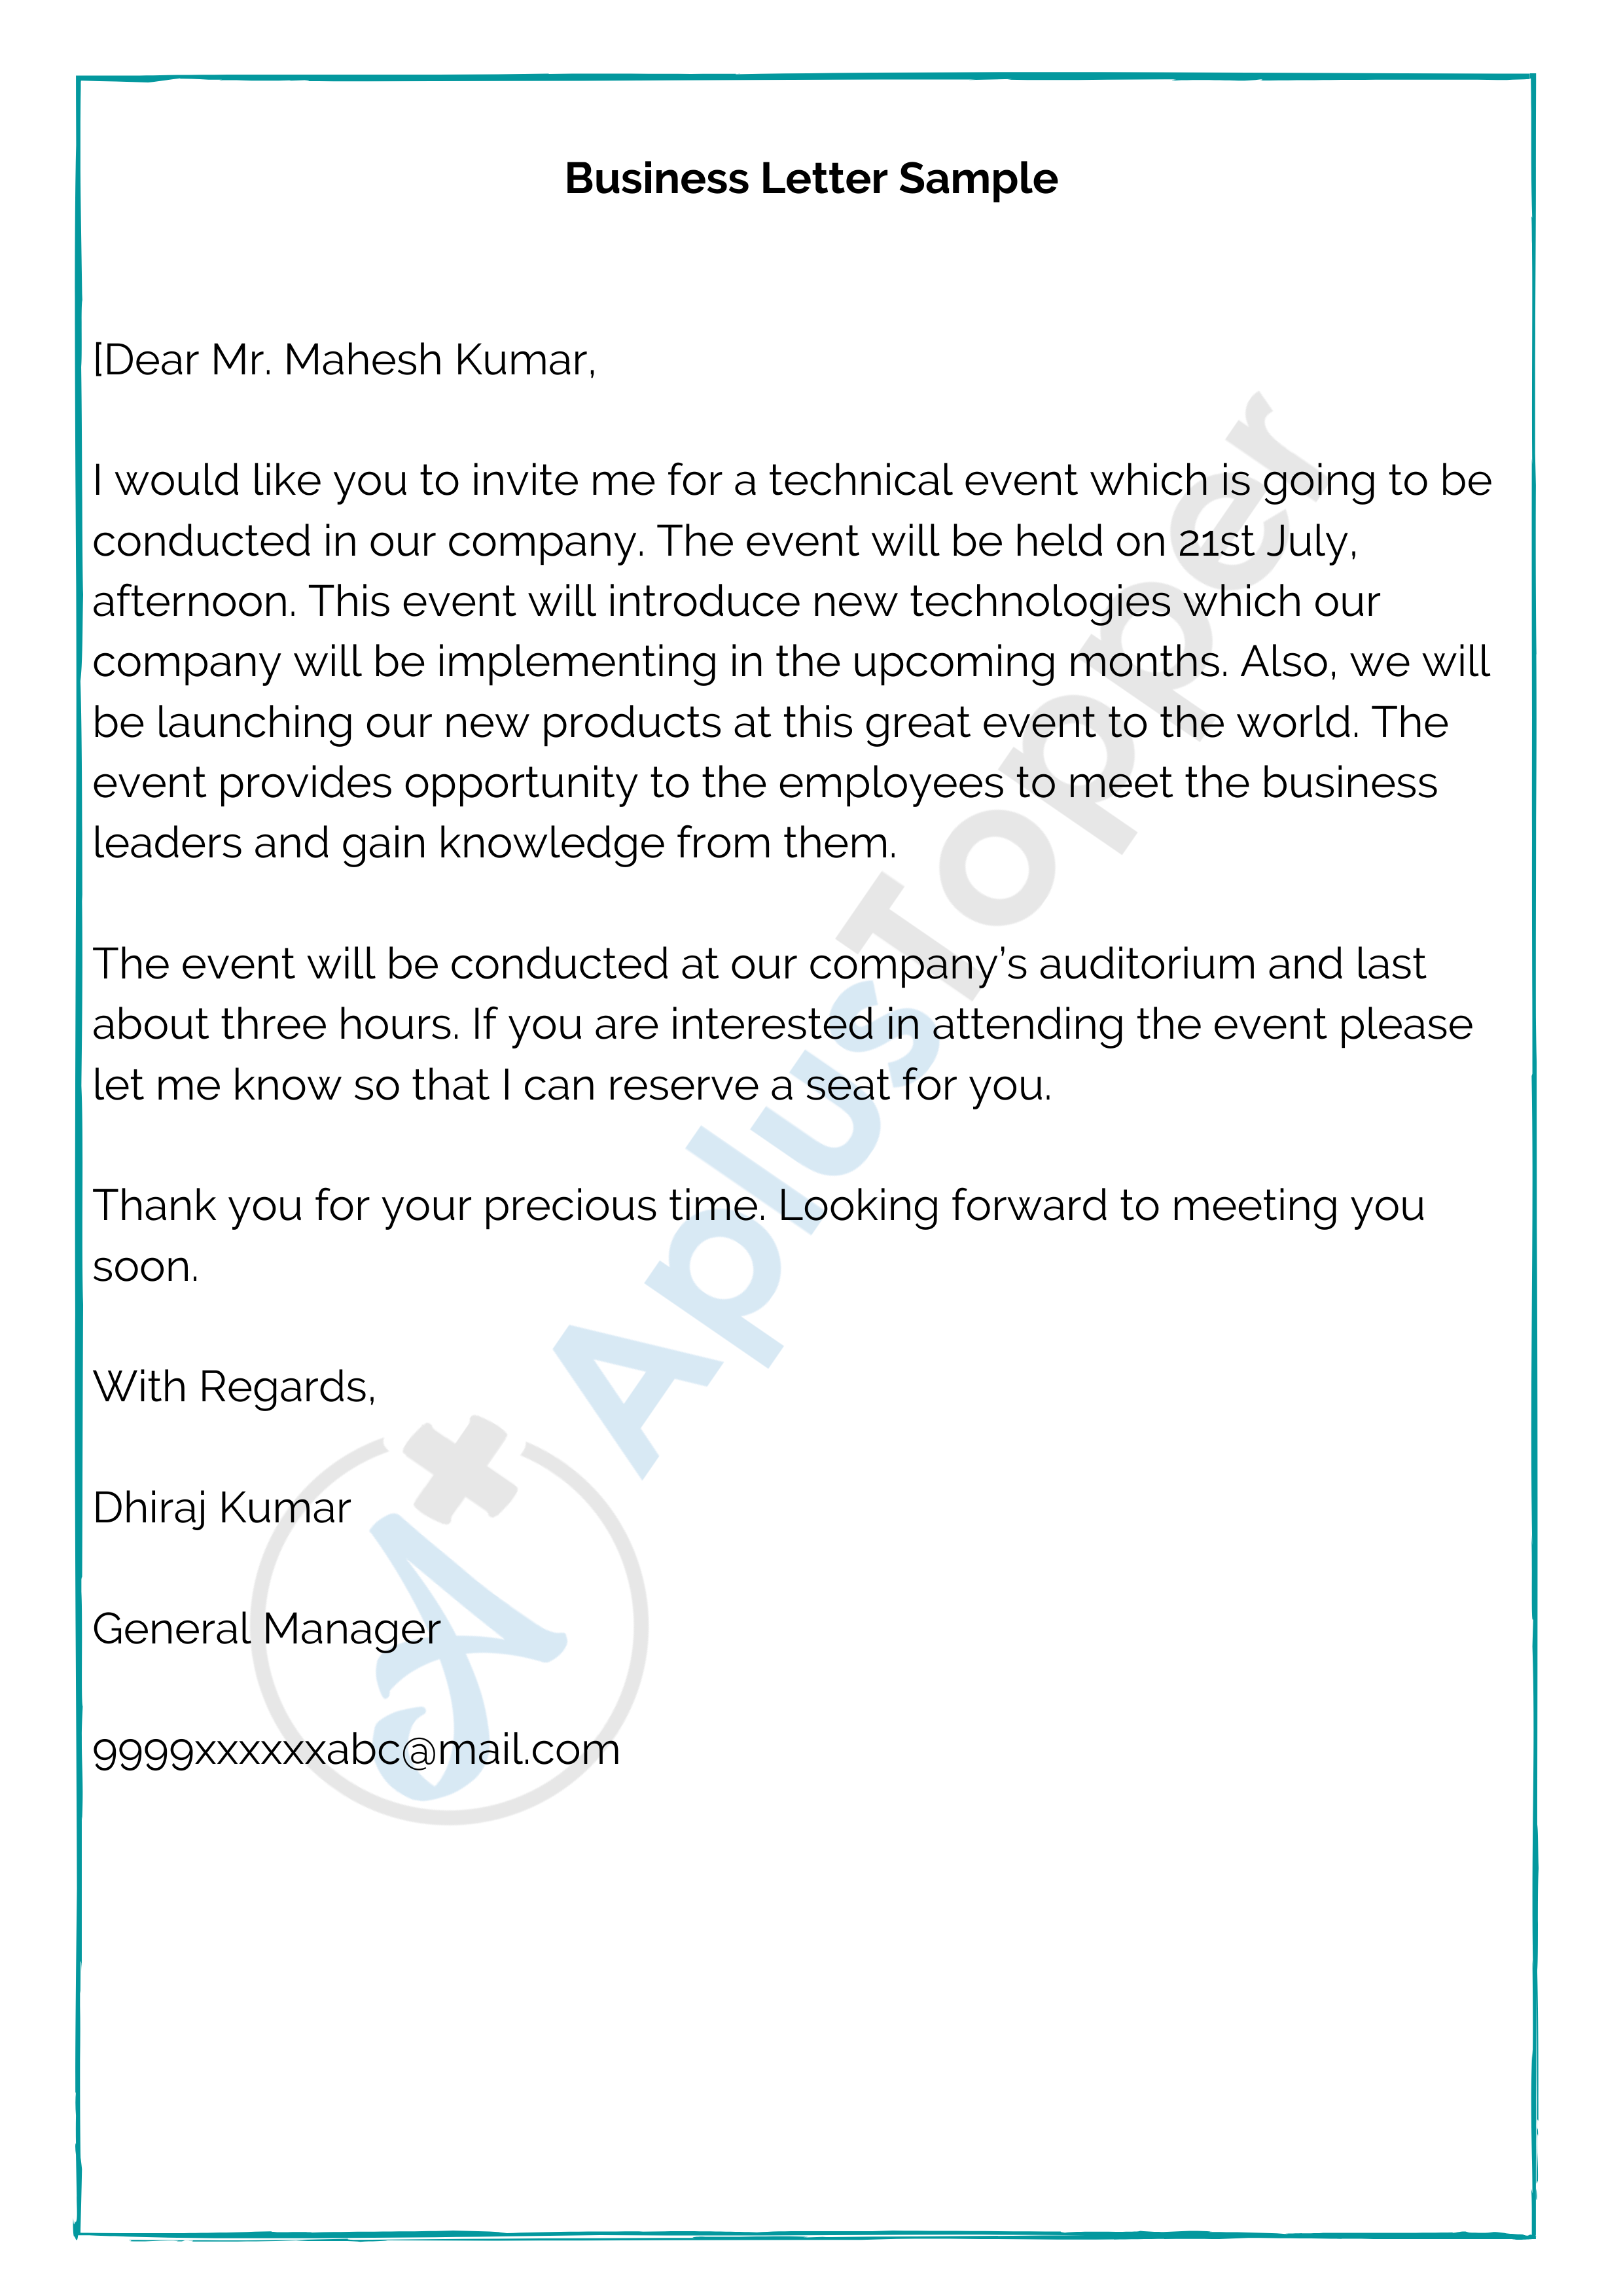 Business Letter Format Samples How To Write Business 